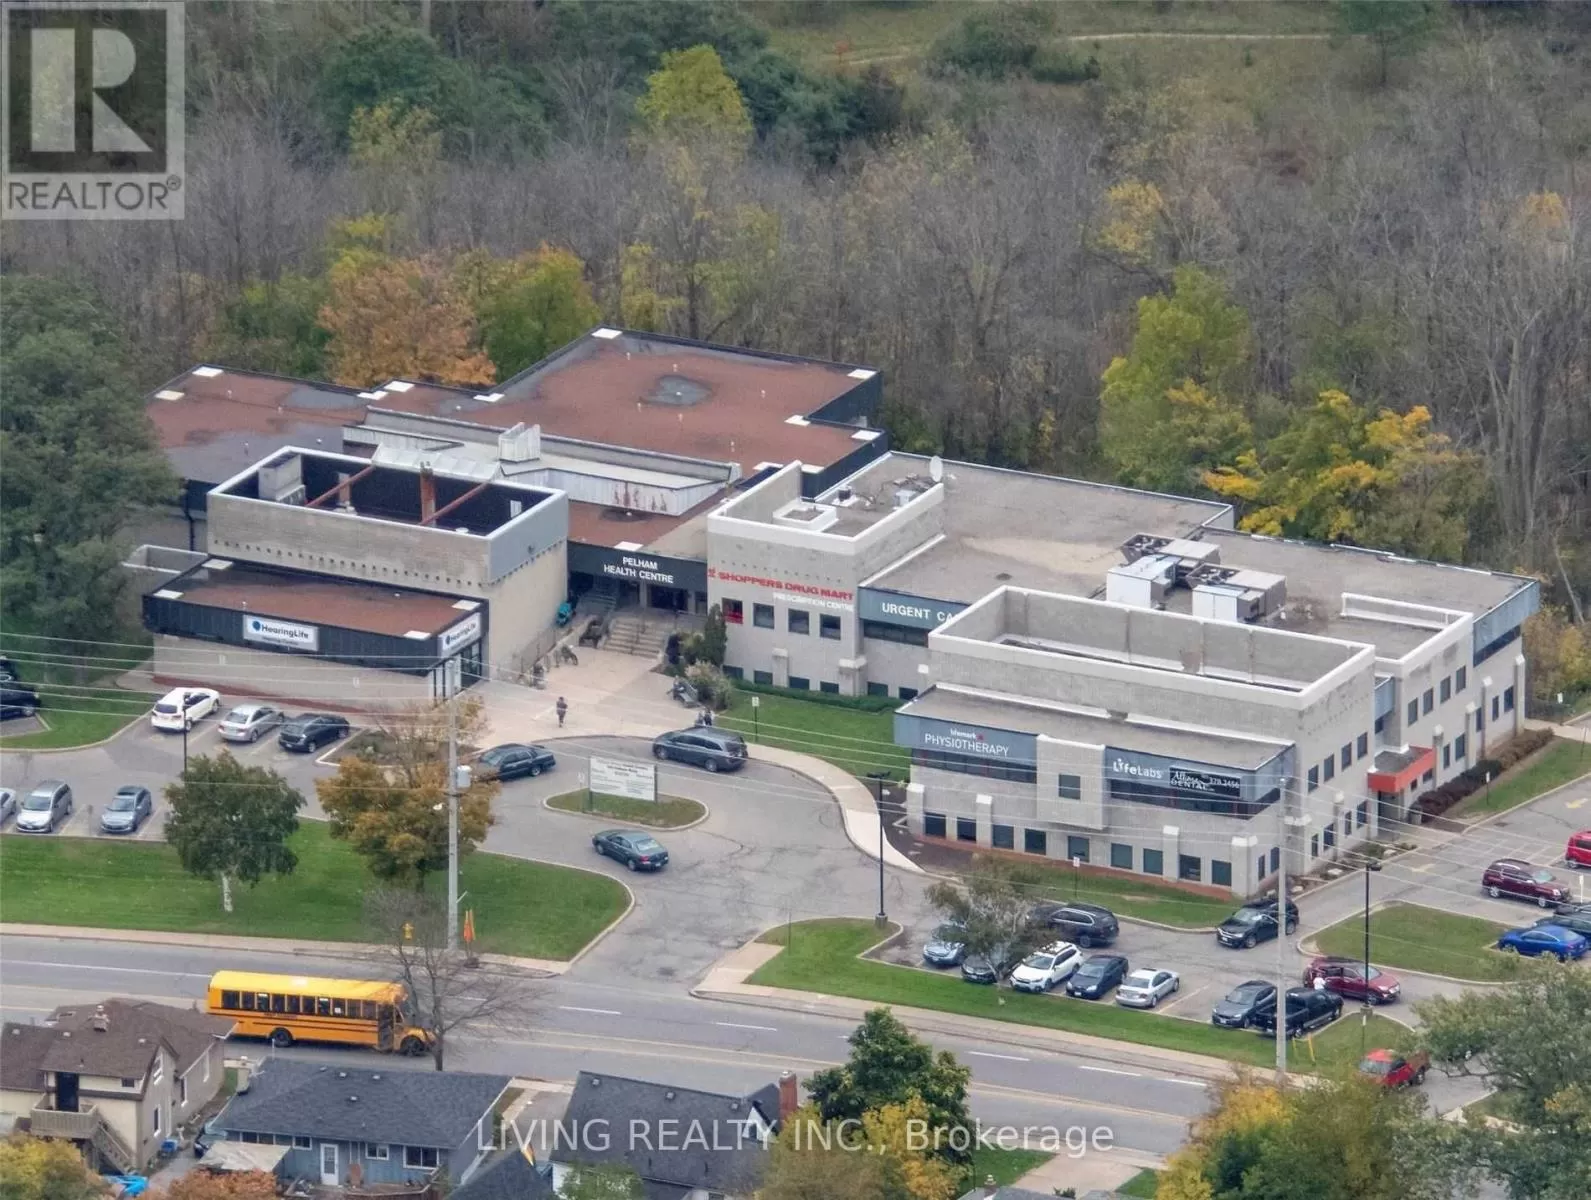 Offices for rent: 202 - 245 Pelham Road, St. Catharines, Ontario L2S 1X8